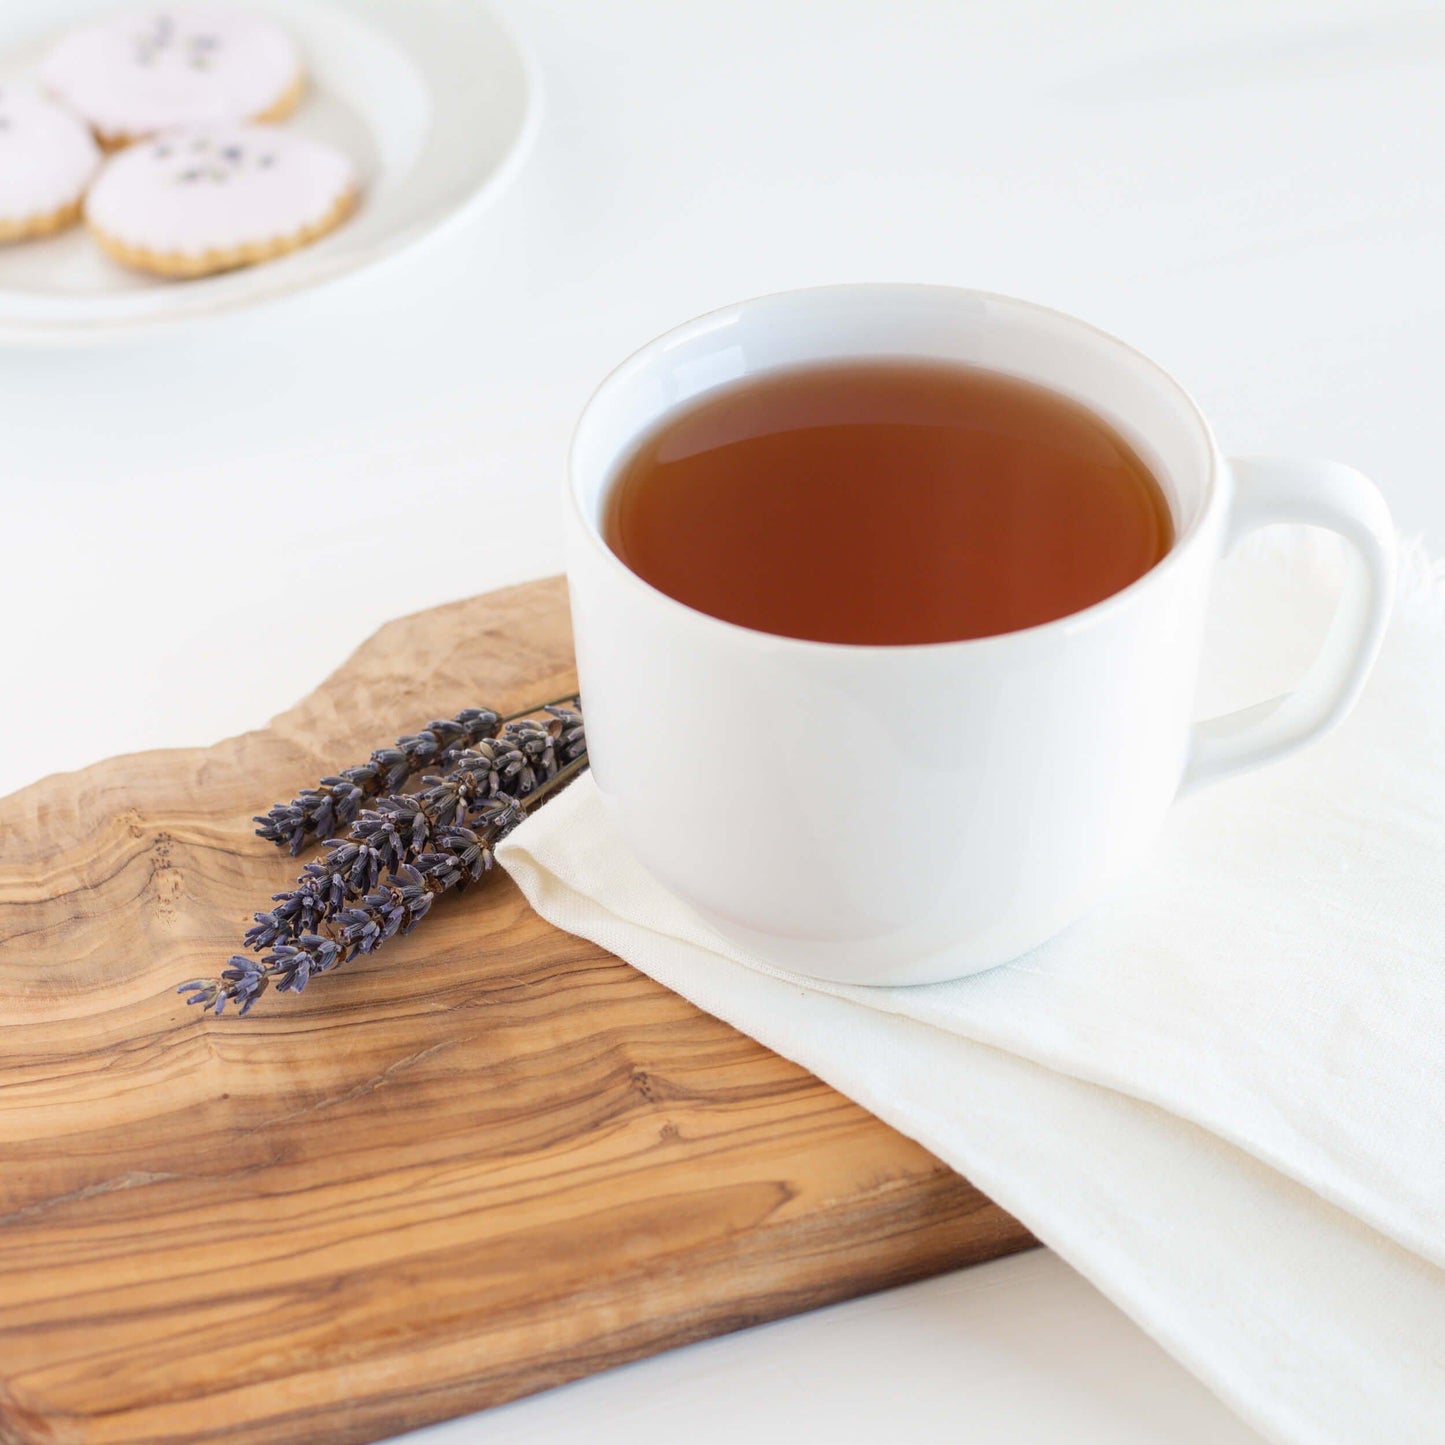 Earl Grey Lavender Black Tea shown as brewed tea in a white mug displayed on a wooden board with a white napkin and lavender sprigs nearby. A plate of cookies is in the background